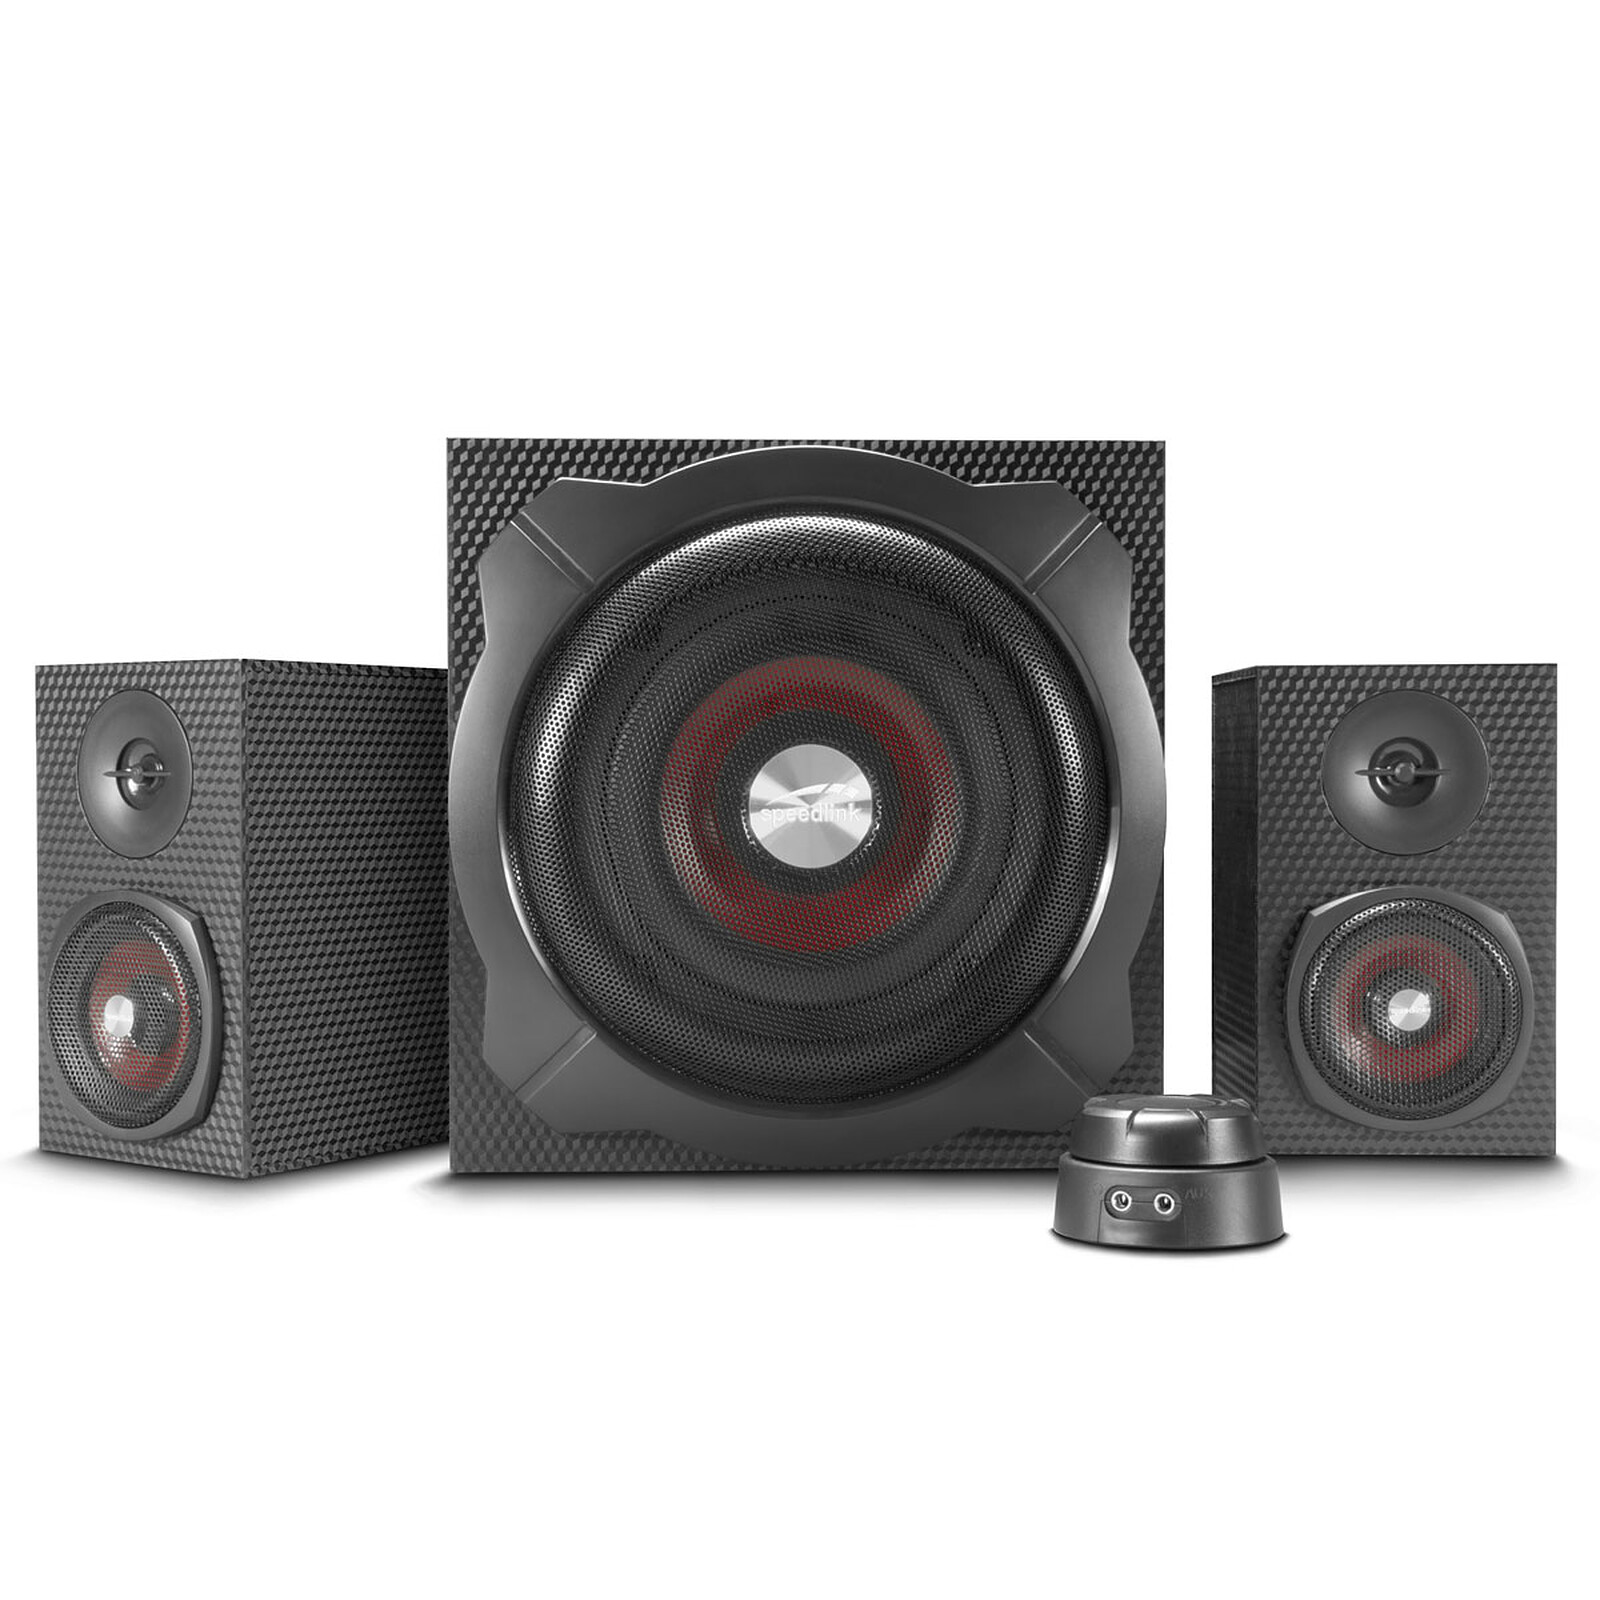 HECATE G5000 - Altavoces PC - LDLC